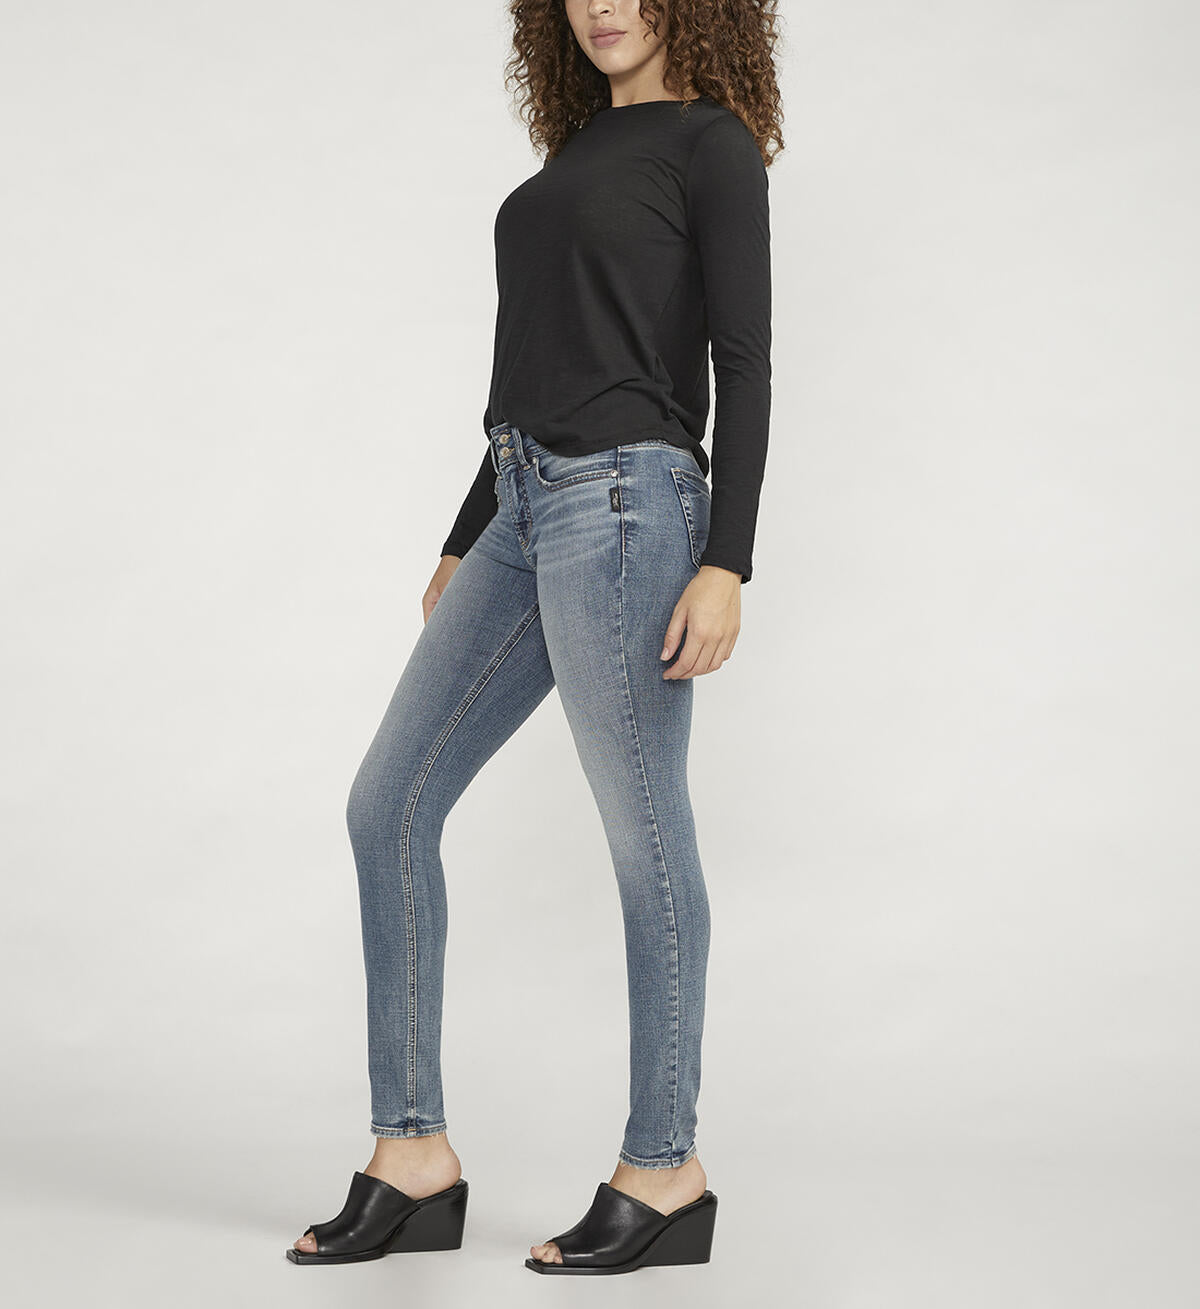 Silver Jeans Suki Mid Rise Skinny Jeans